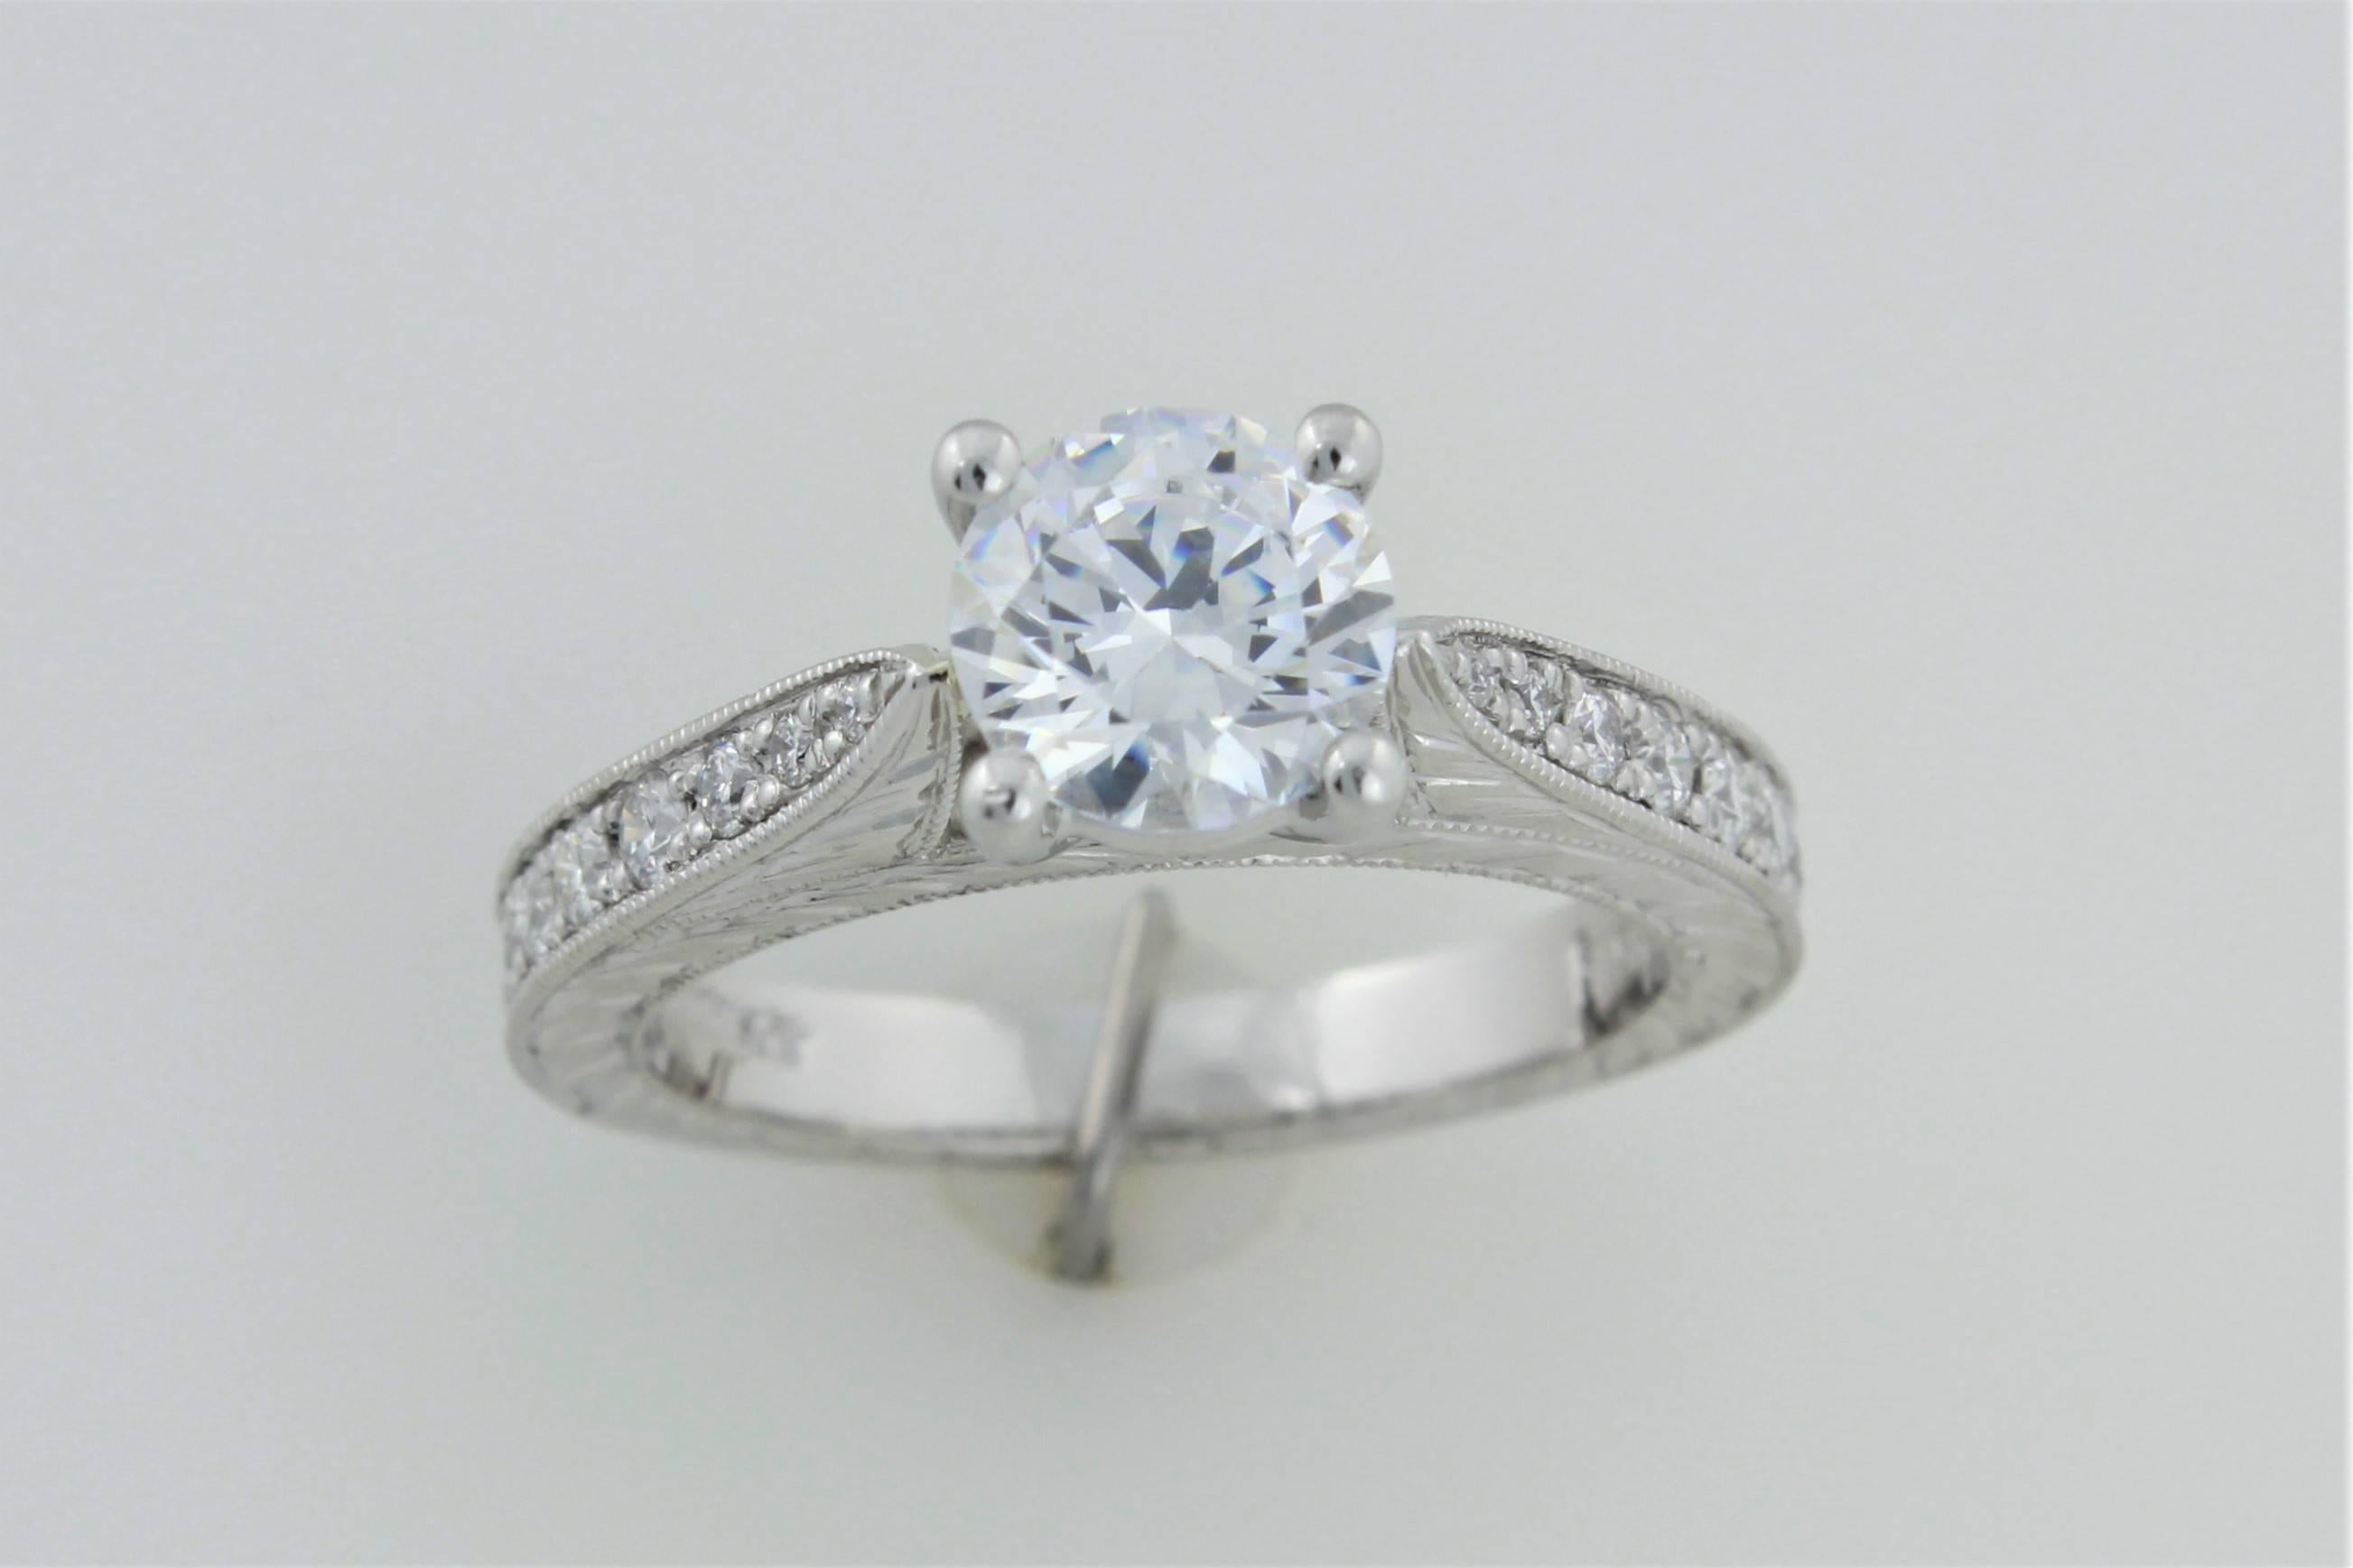 Here is a beautiful platinum Precision Set flush fit ring mounting with .55 carats of G-H Color, VS clarity diamonds.  The center is a cubic zirconia so this is a perfect ring to reset your center diamond into a new frame!!   Both outsides of the